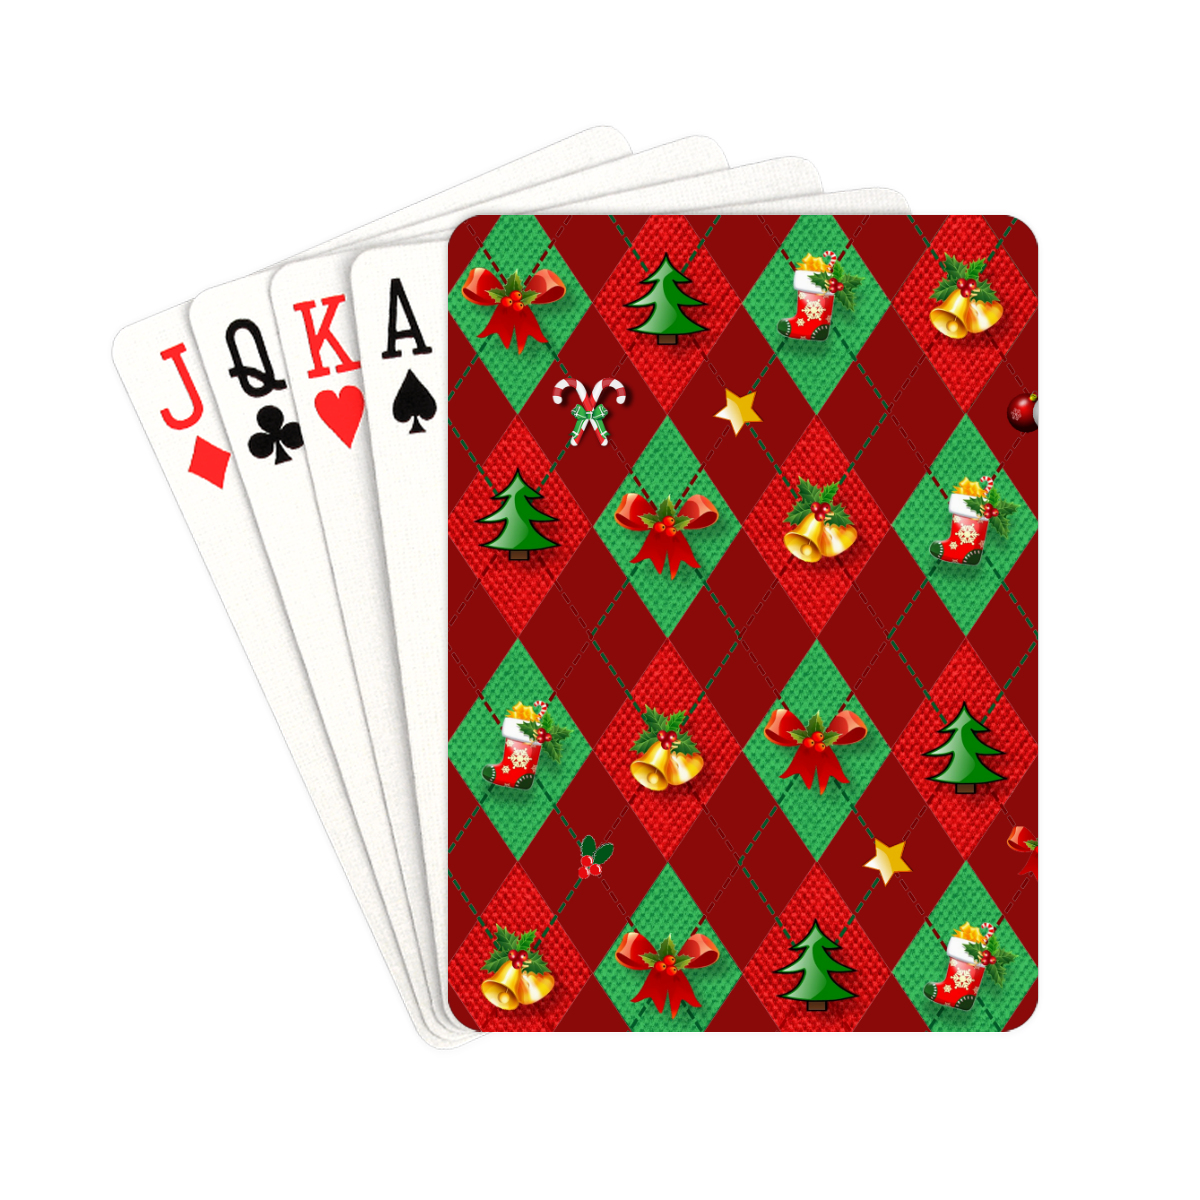 Christmas Argyle Ugly Sweater Pattern on Red Playing Cards 2.5"x3.5"